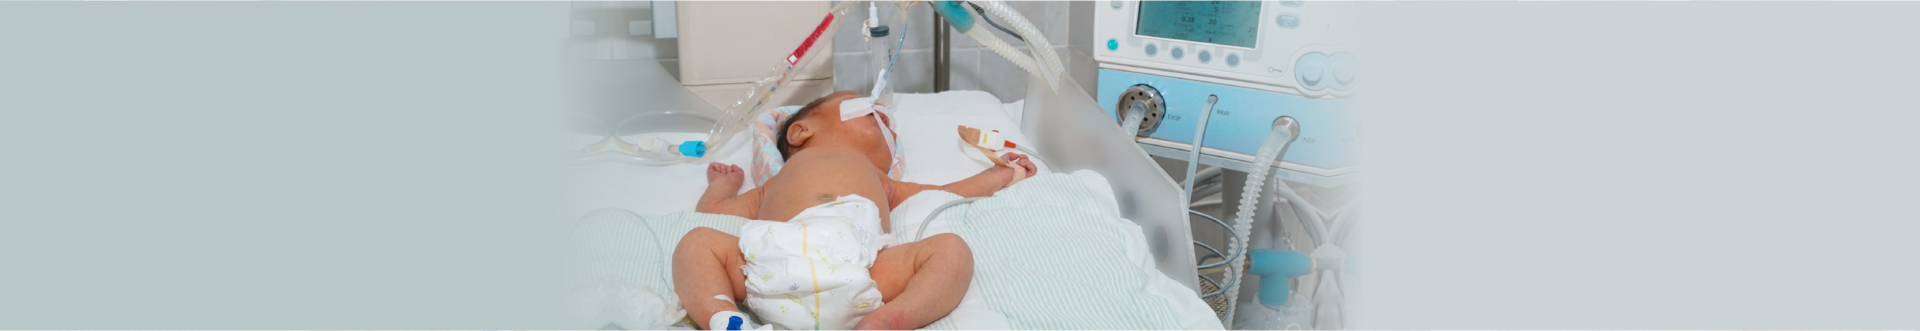 Newborn baby with hyperbilirubinemia on breathing machine or ventilator with pulse oximeter sensor and peripheral intravenous catheter in neonatal intensive care unit at children's hospital